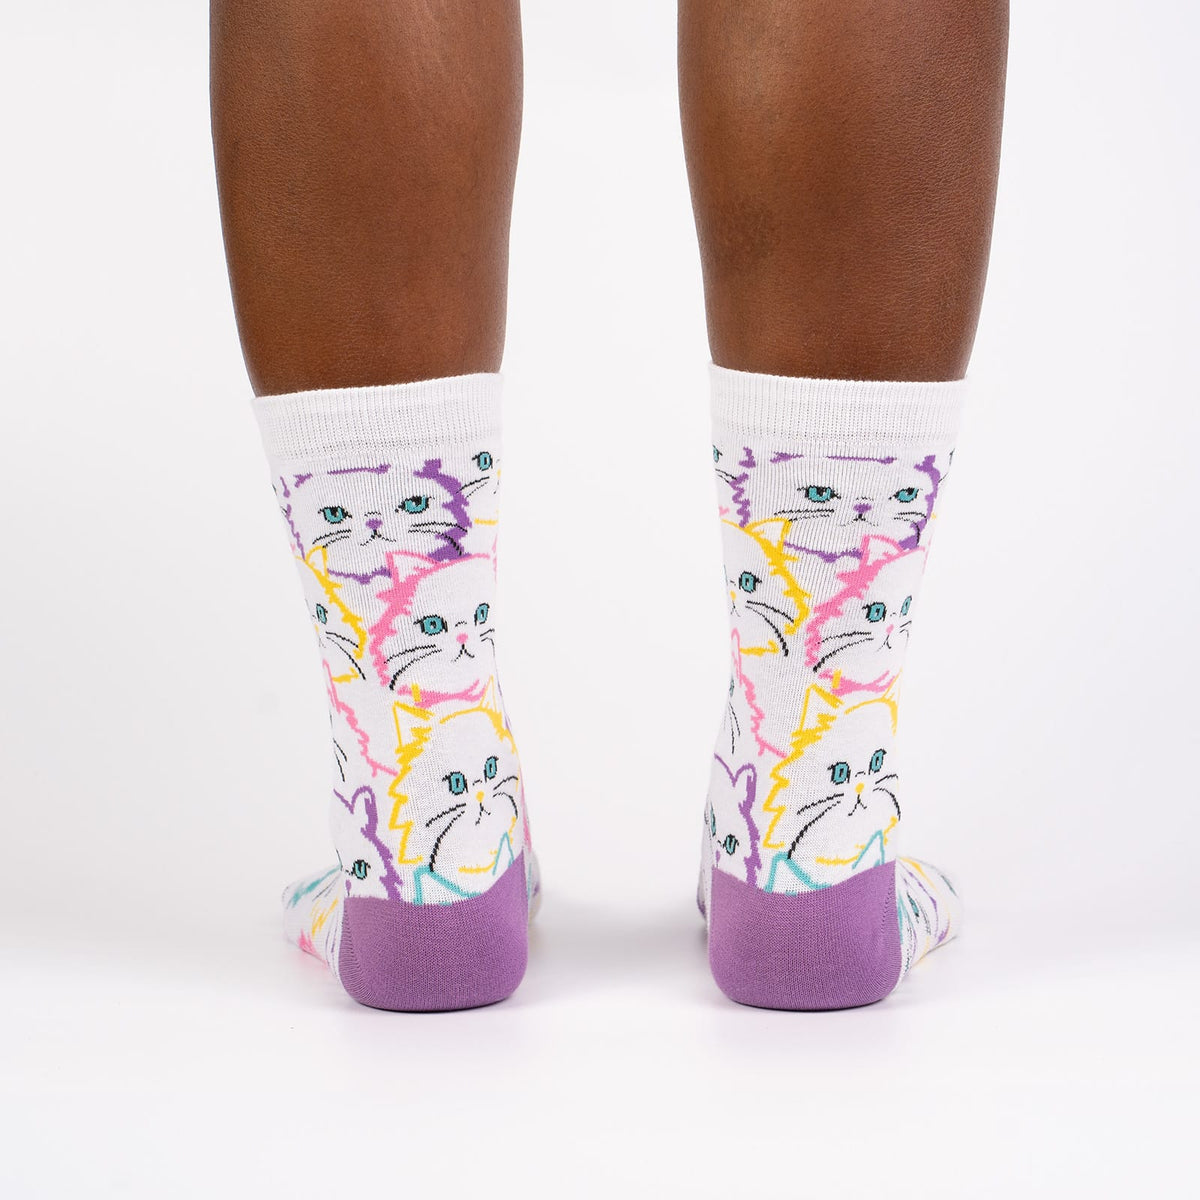 Sock It To Me Fur Real women&#39;s crew sock featuring white sock with lavender heel and toe with white cats outlined in pastel colors. Socks worn by model seen from behind.